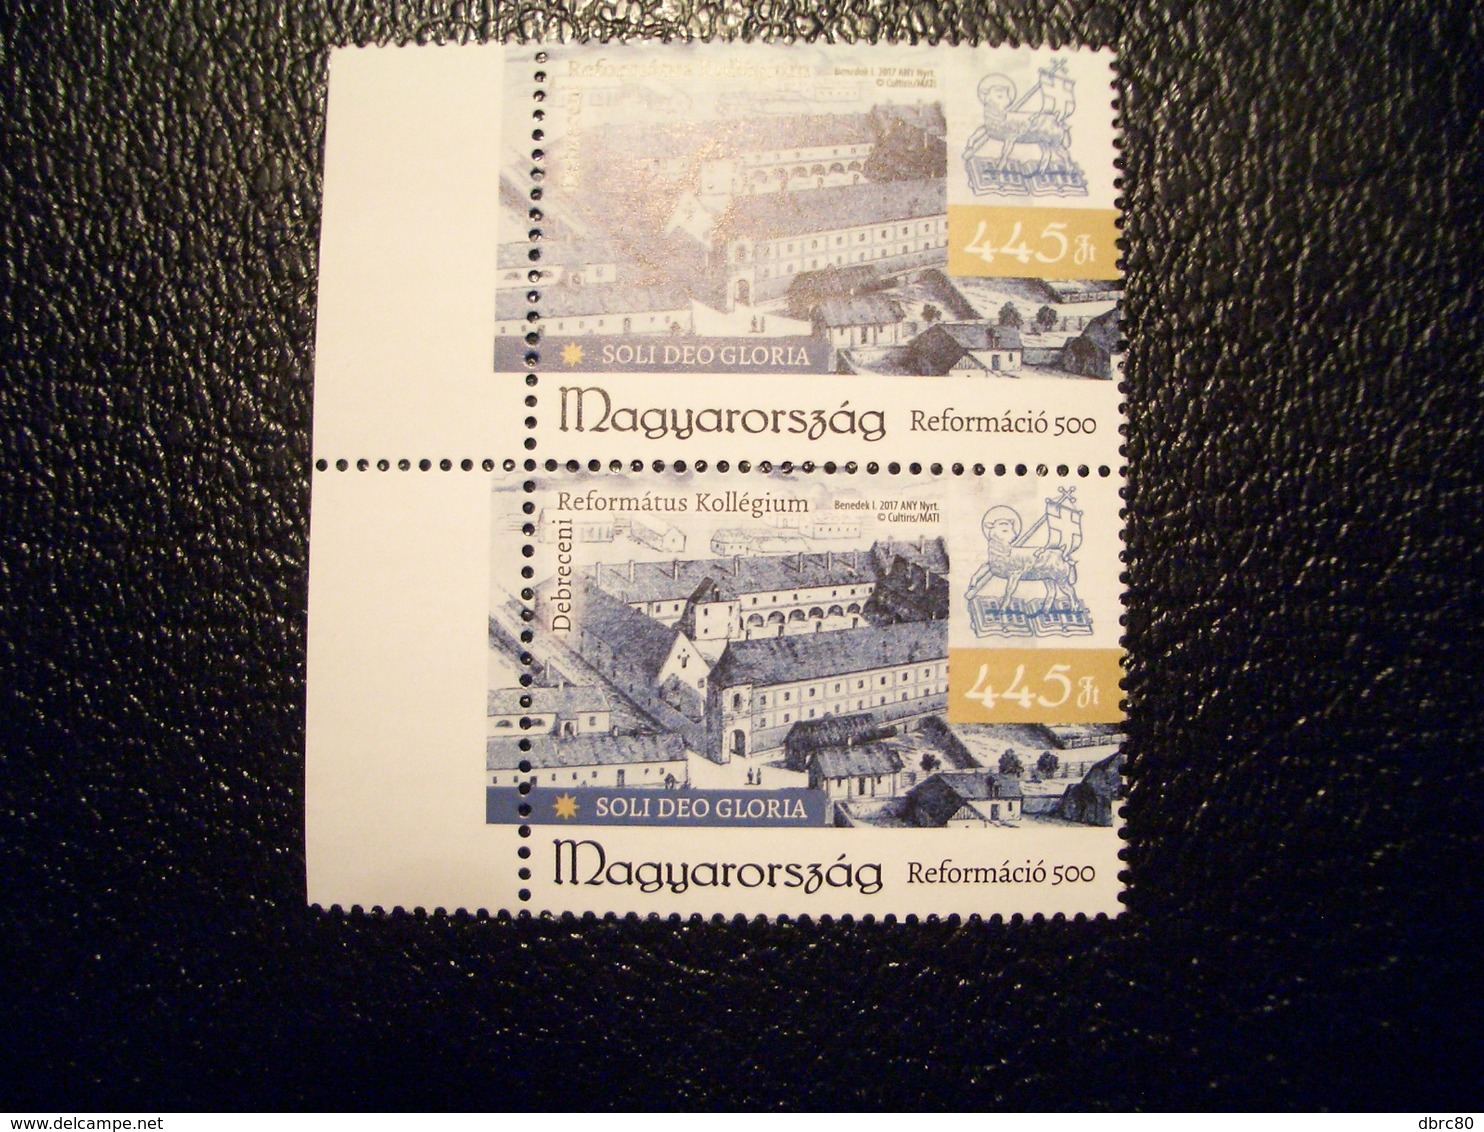 Hungary, 2017, Reformation 500, Debrecen Reformed College, Protestant, Christianity, Architecture, Pair - Unused Stamps